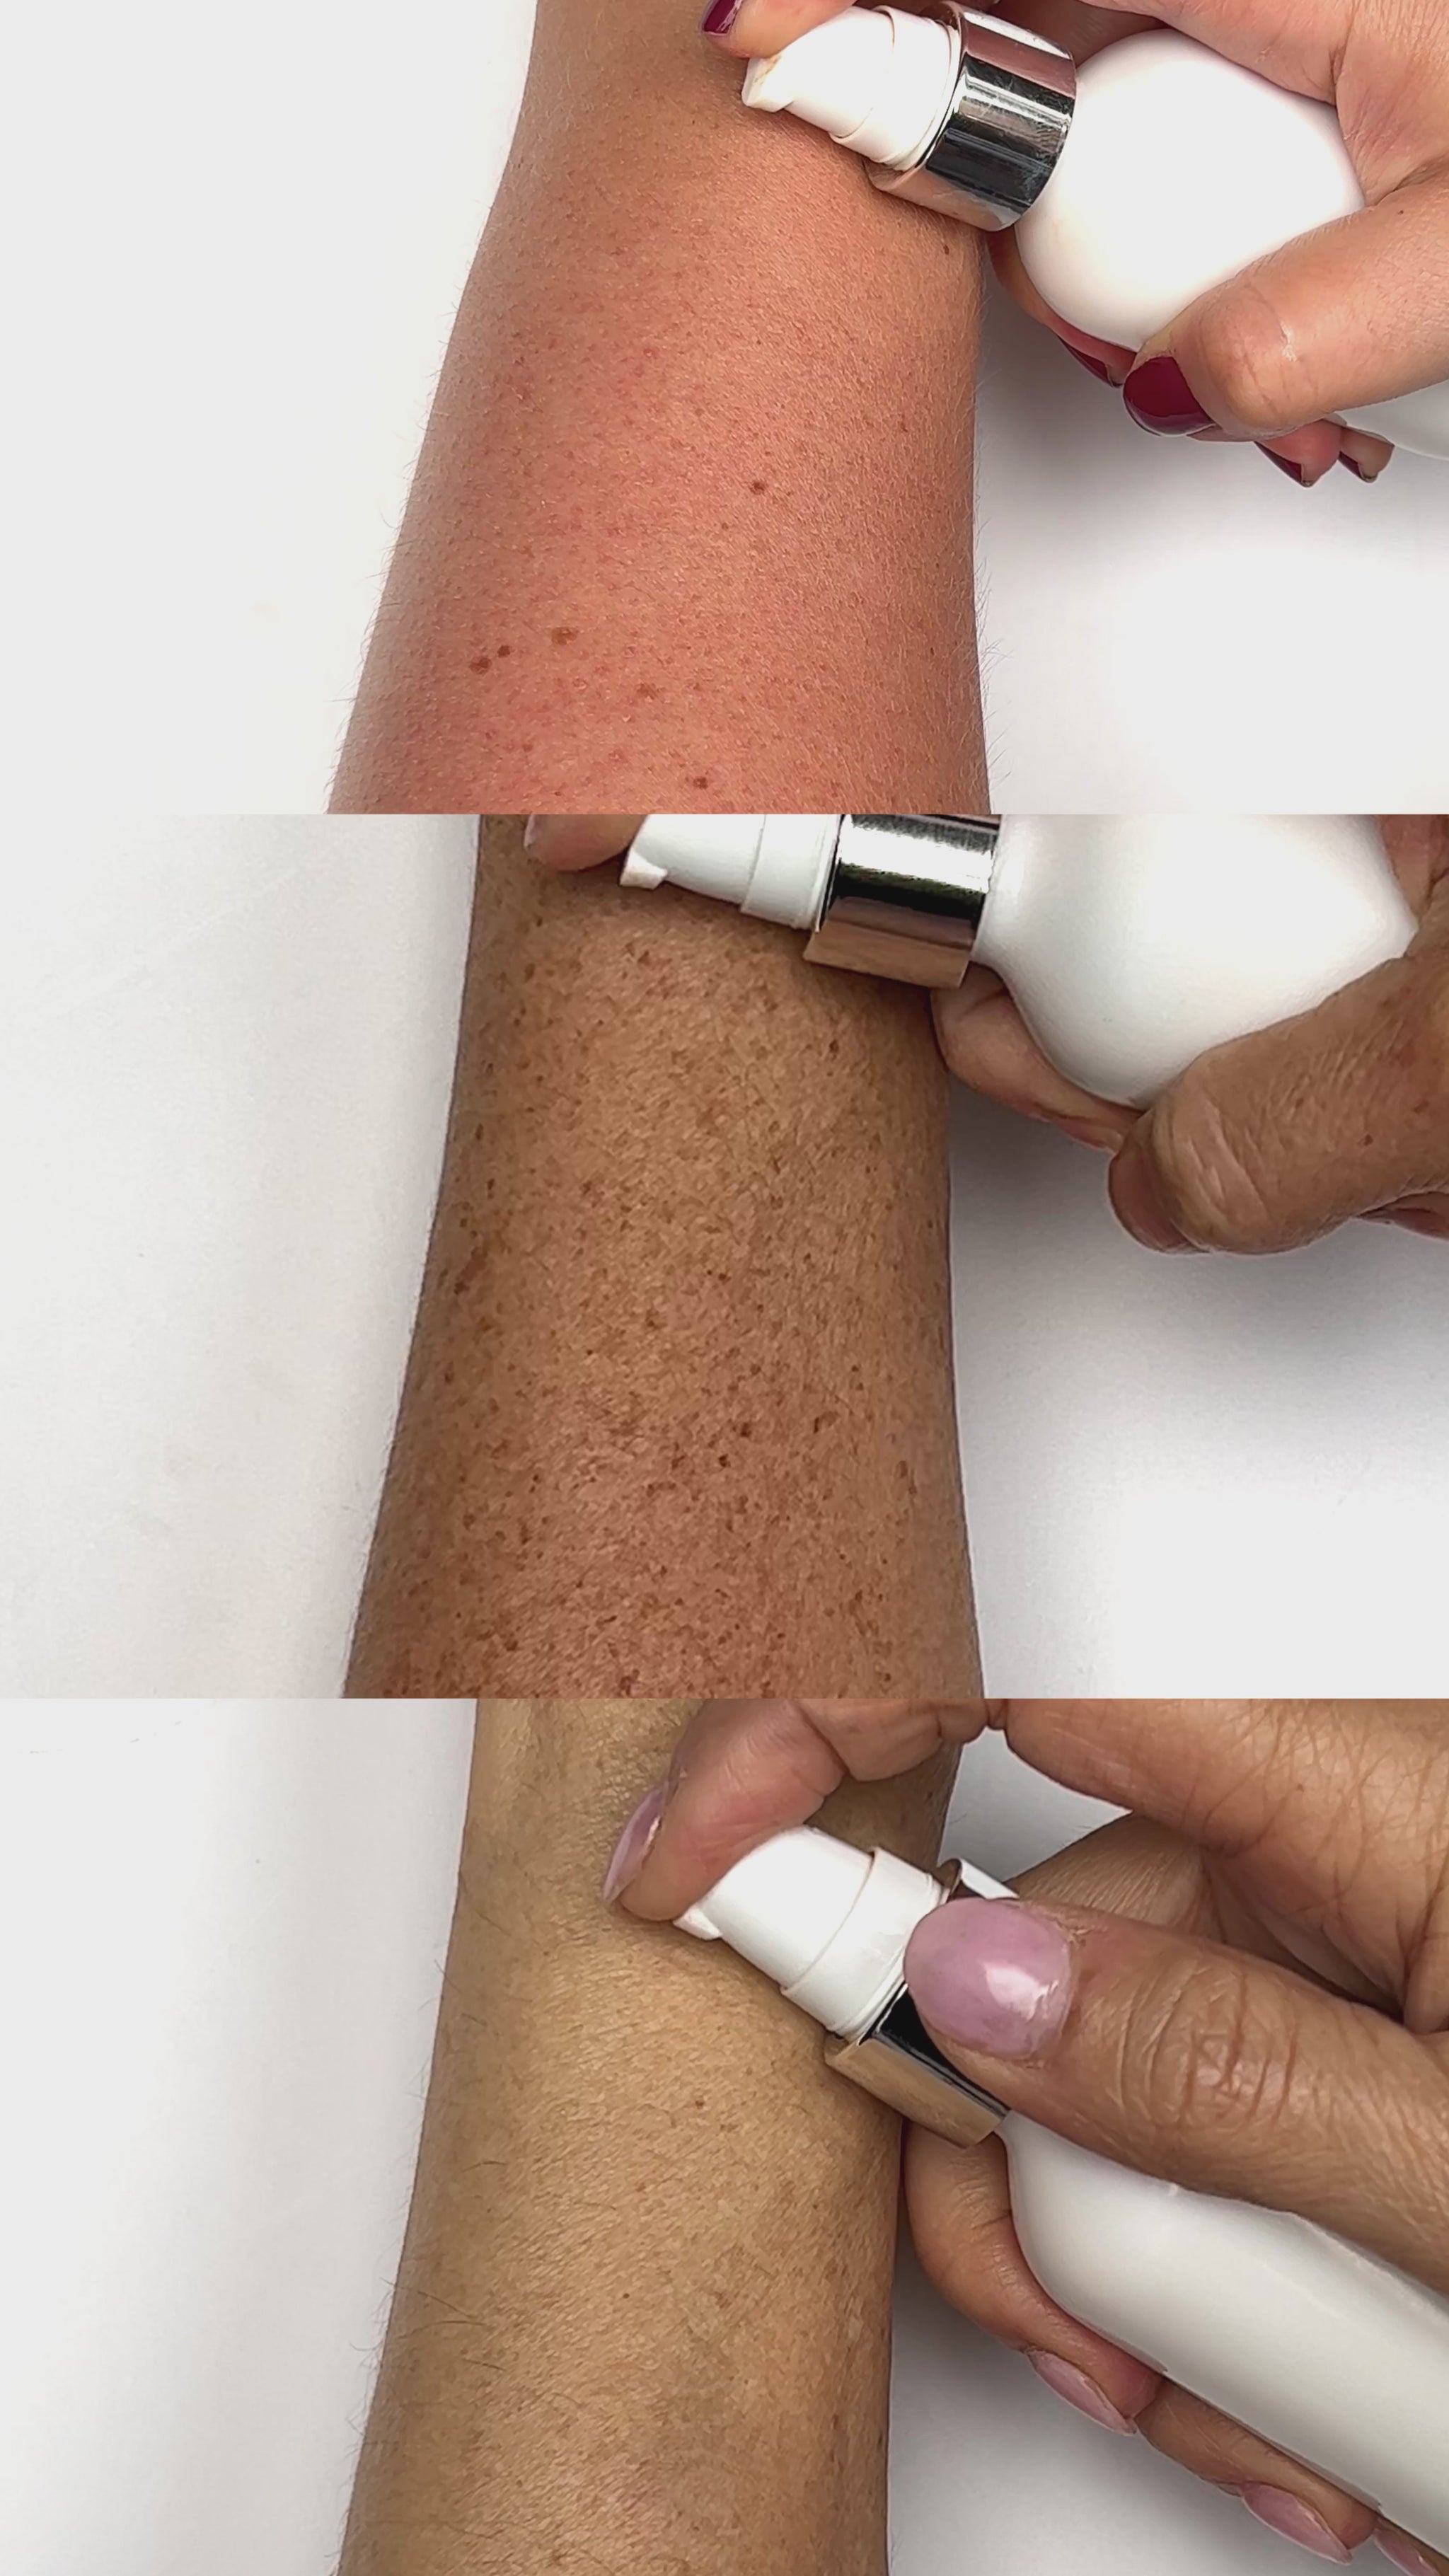 a video showing 3 different women with different skin tones, one ivory & pink, one freckled and medium ivory, and one mature and olive skinned all applying the SPF to their arms and then their face. It shows the SPF rubbing in. 